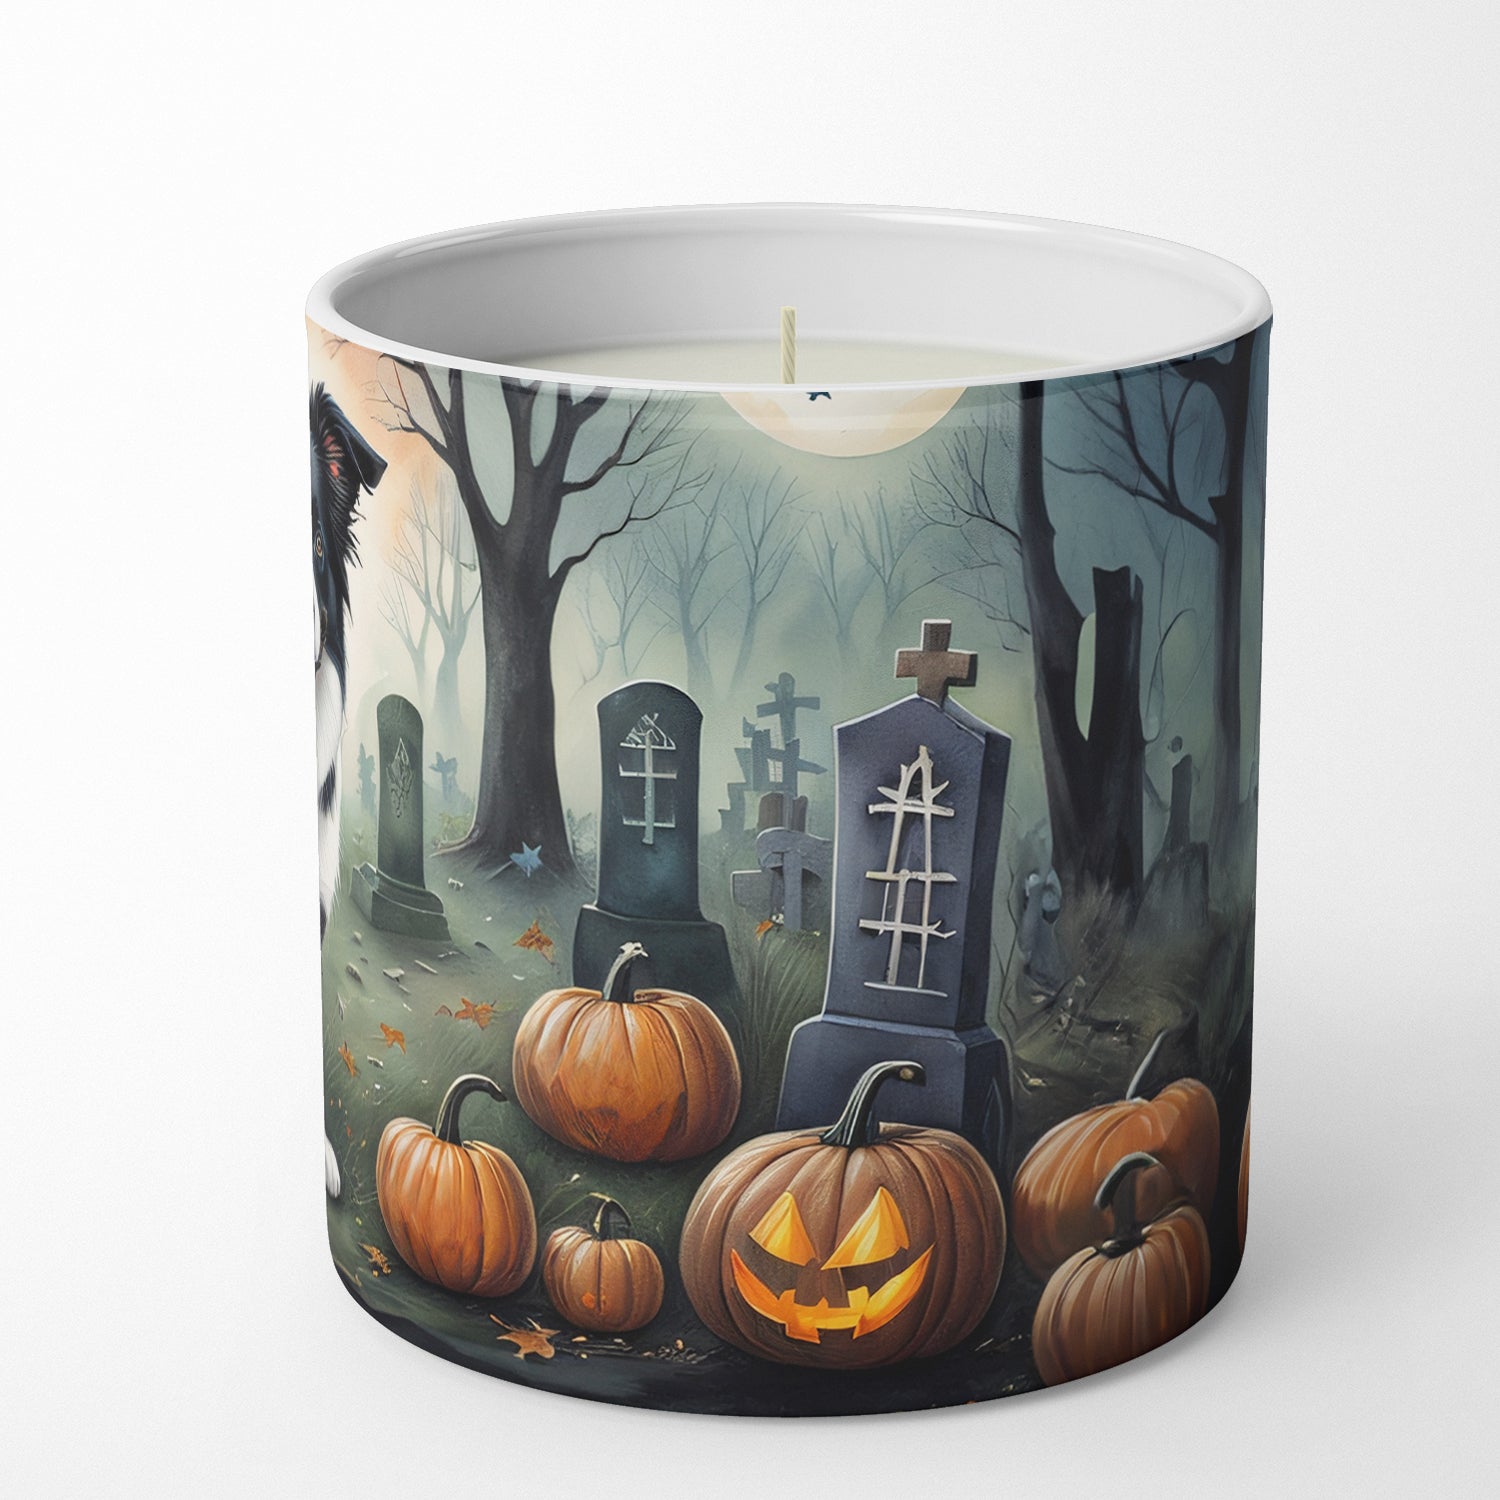 Border Collie Spooky Halloween Decorative Soy Candle